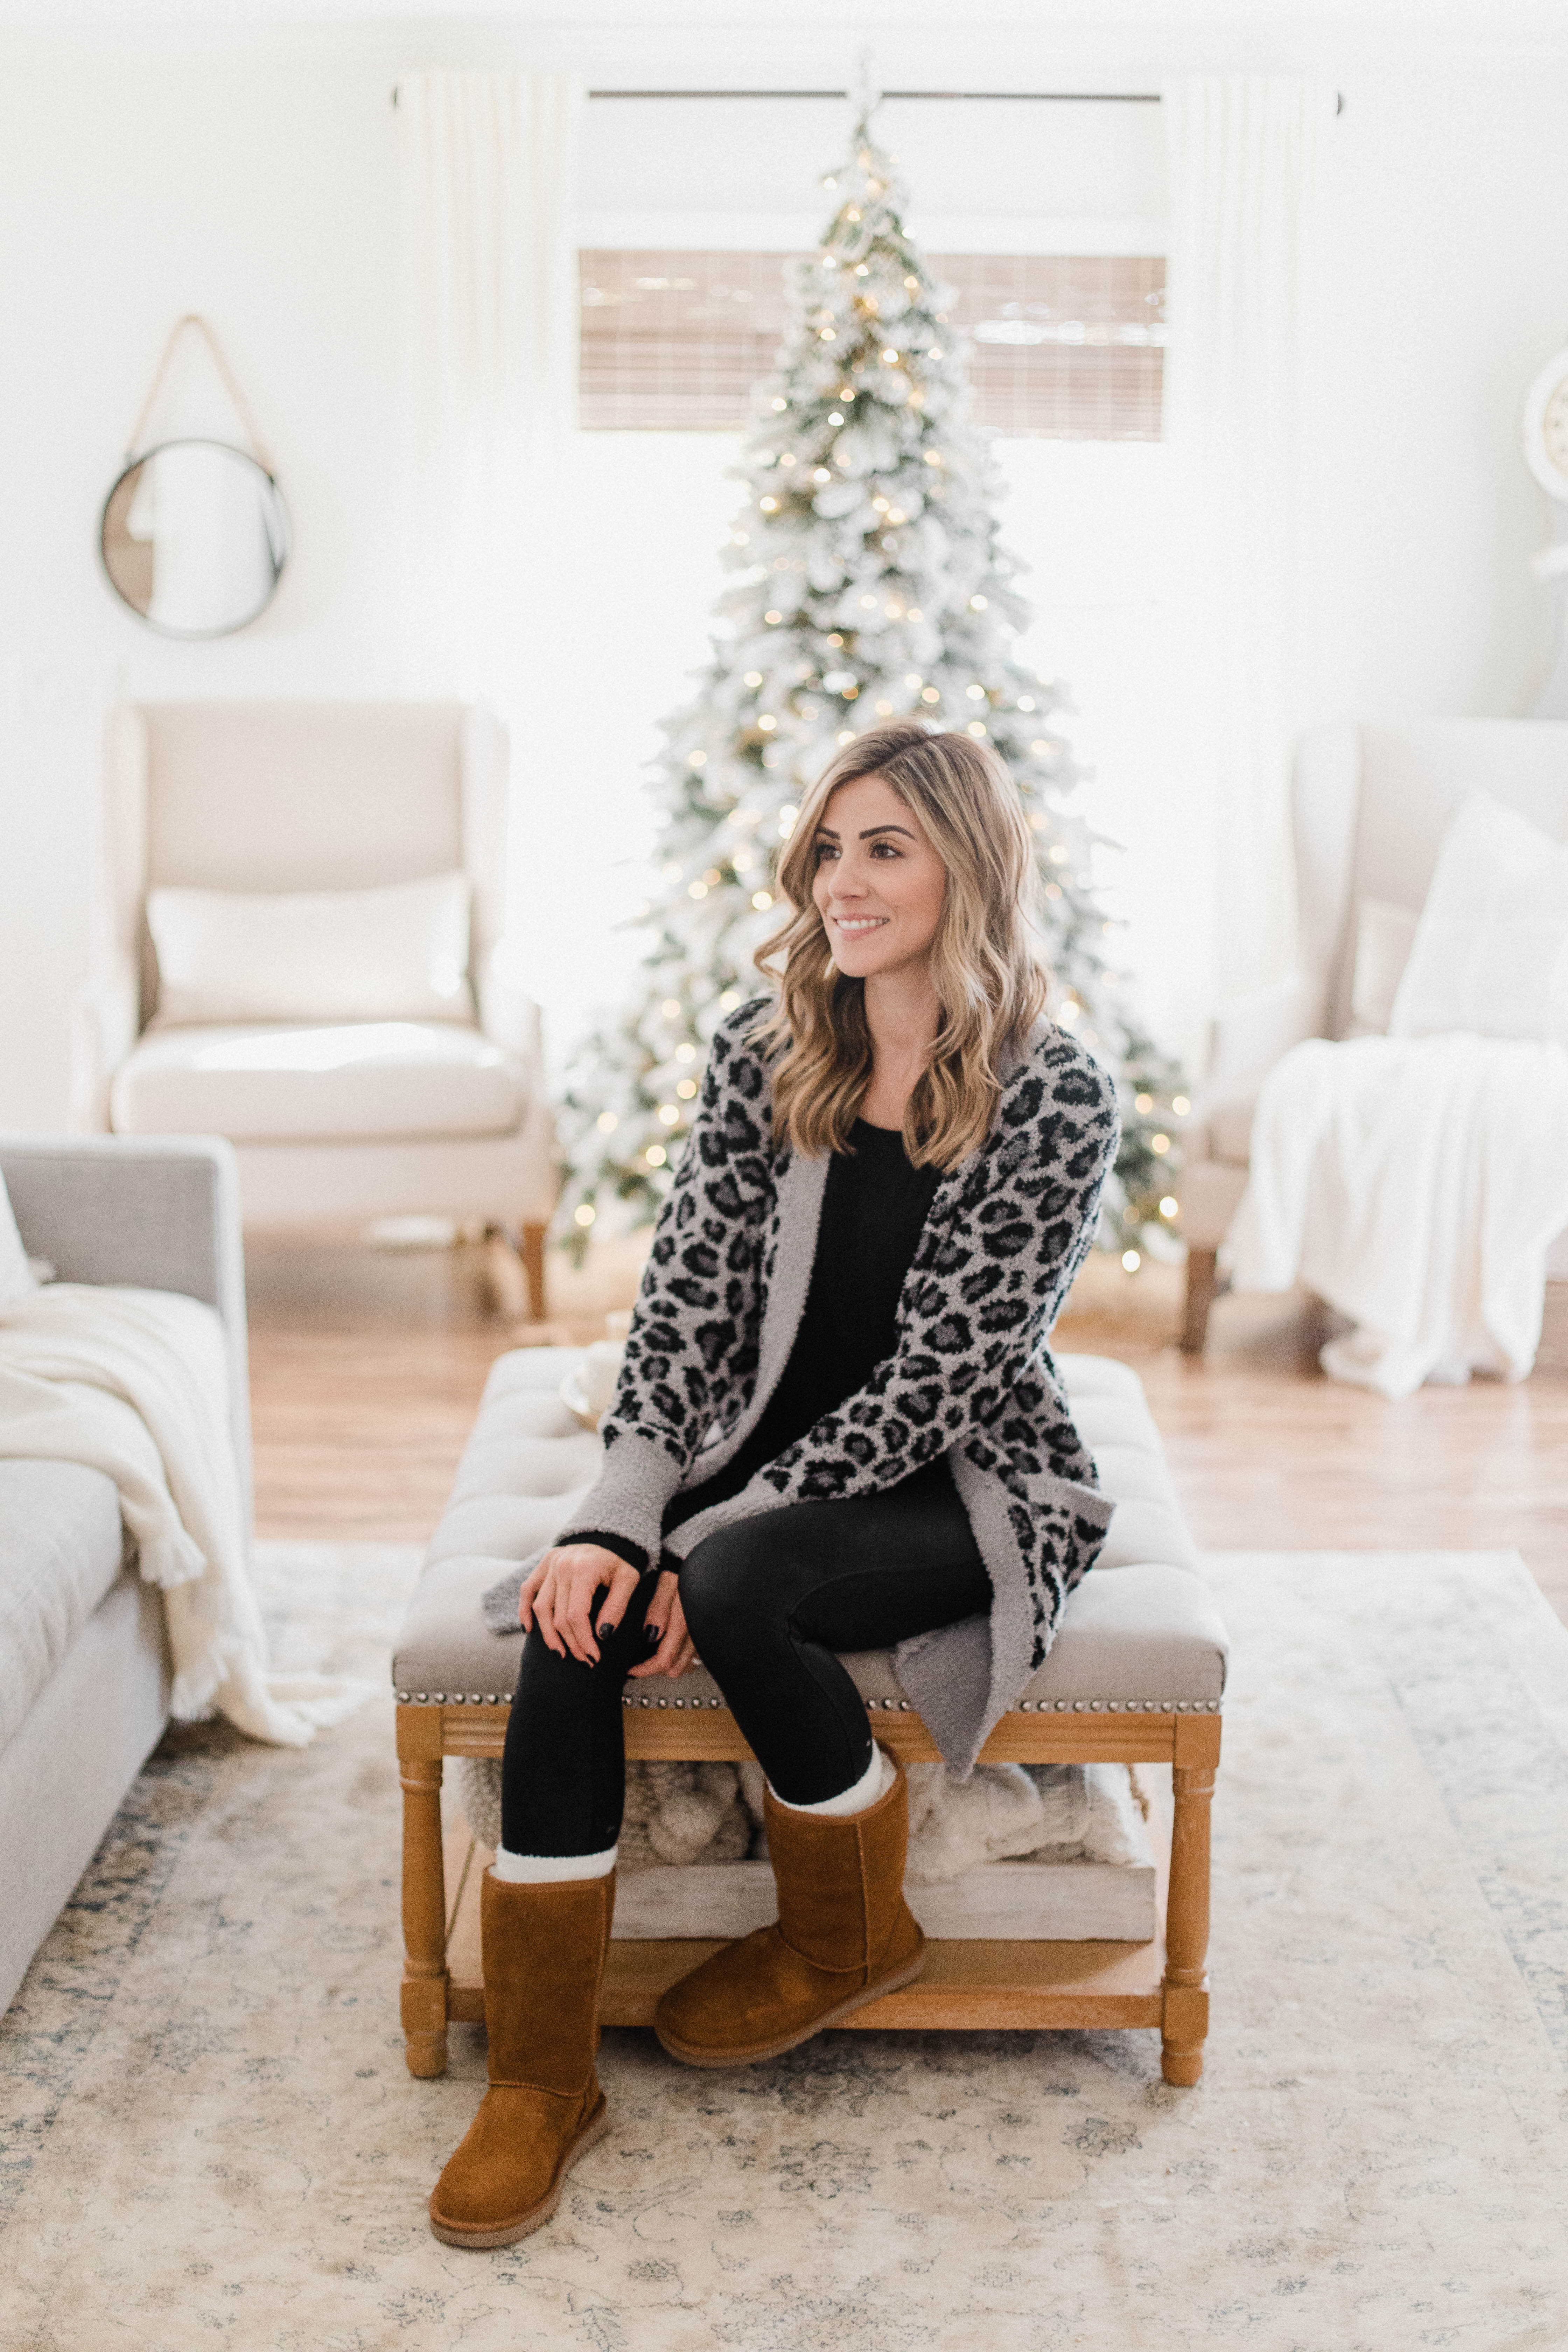 Connecticut life and style blogger Lauren McBride shares her Holiday Gift Guide for Cozy gifts, featuring Barefoot Dreams, Muk Luks, and more.